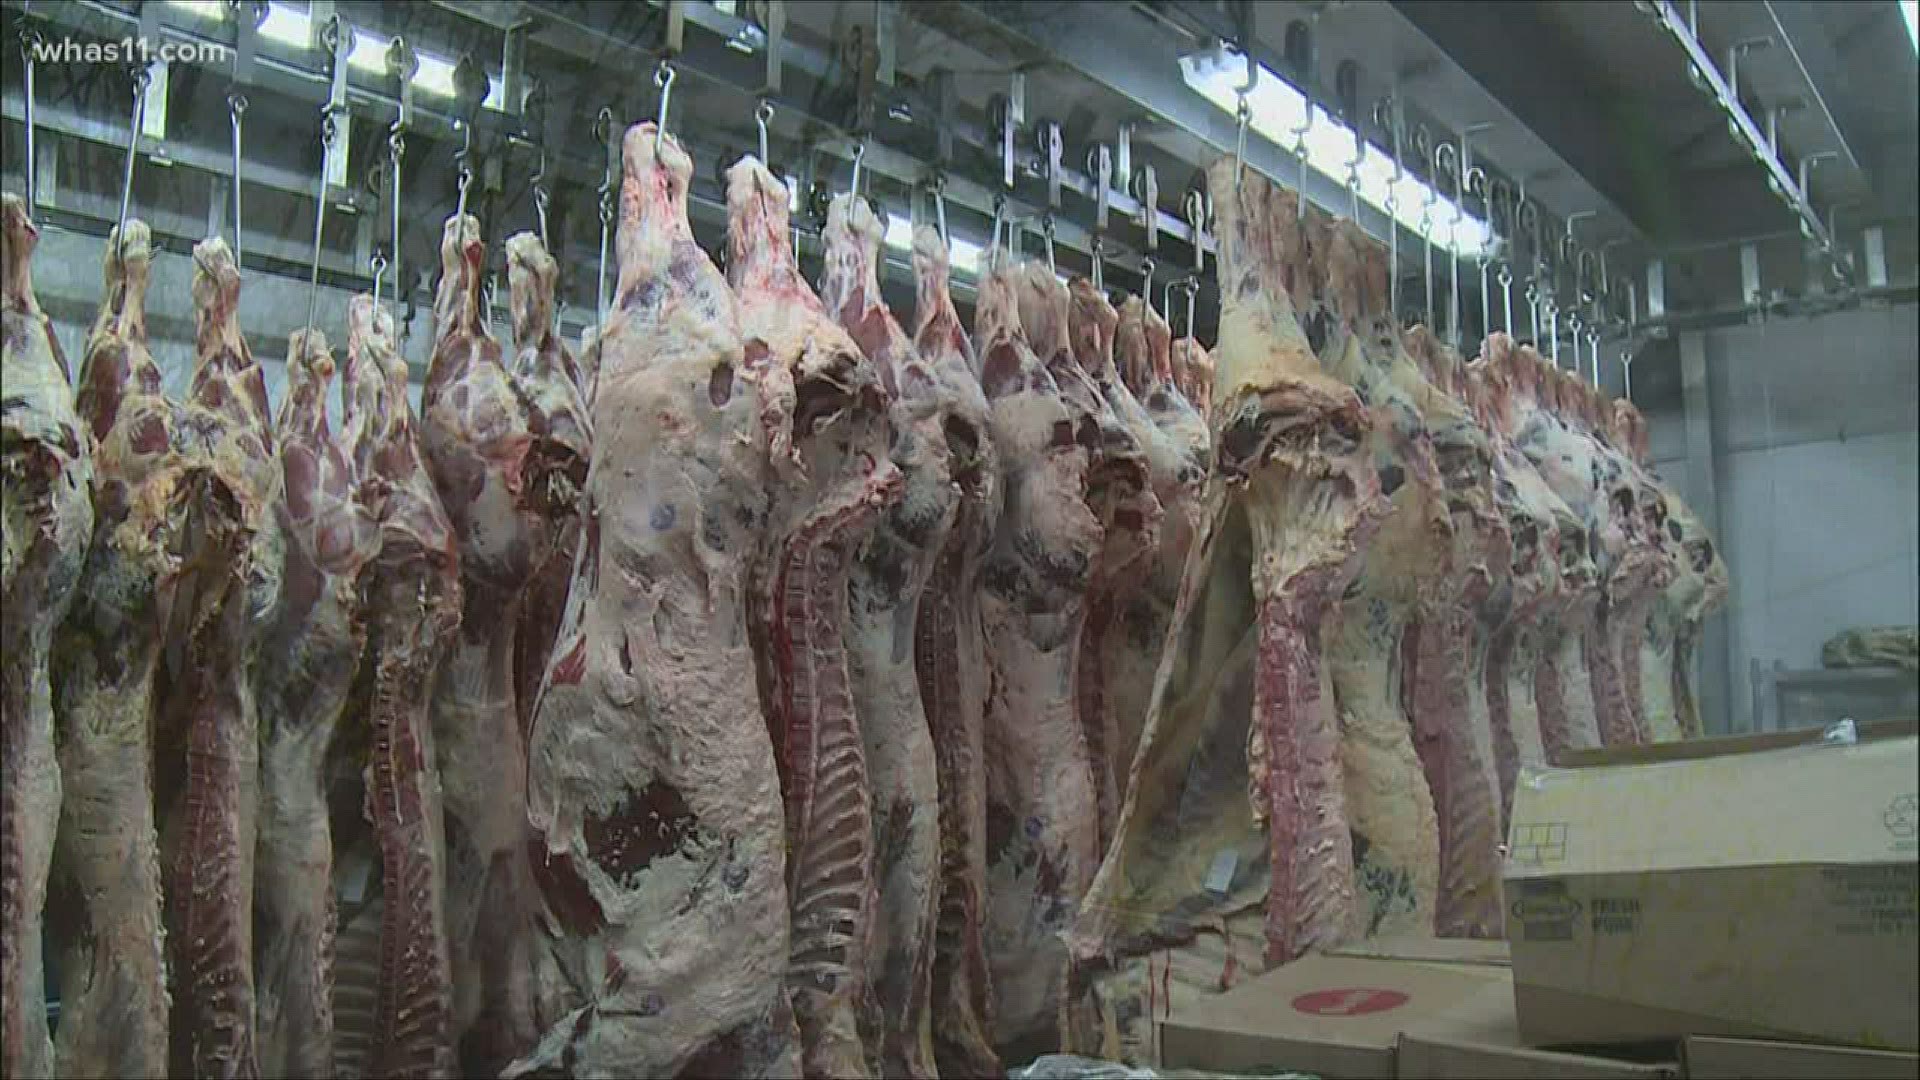 Closing of some meat processing plants have many people worried about the food supply, but one Kentucky butcher is showing no signs of slowing down.